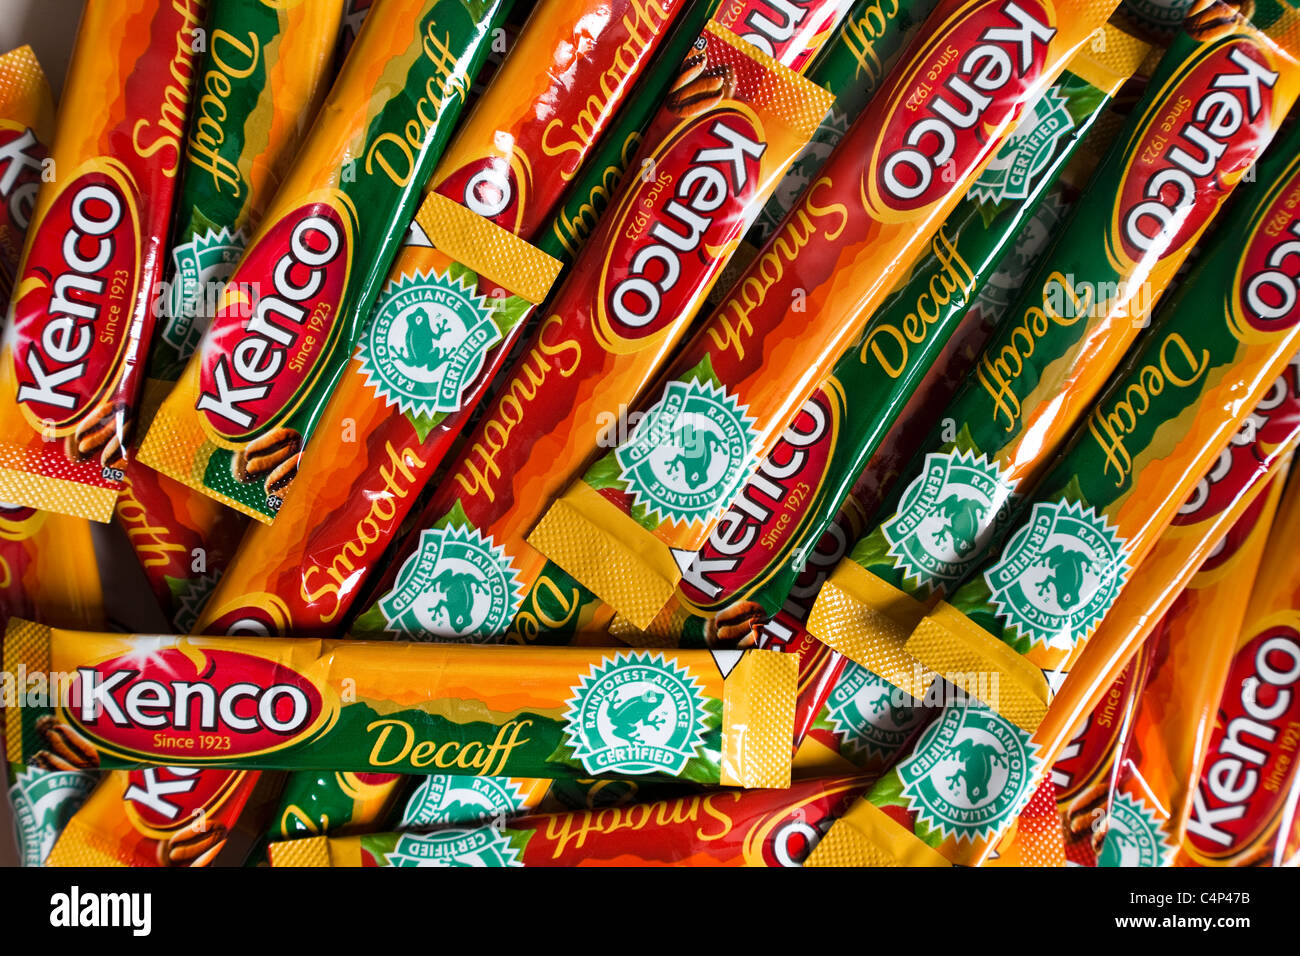 Kenco instant coffee sachets baring the Rainforest Alliance Certification logo Stock Photo